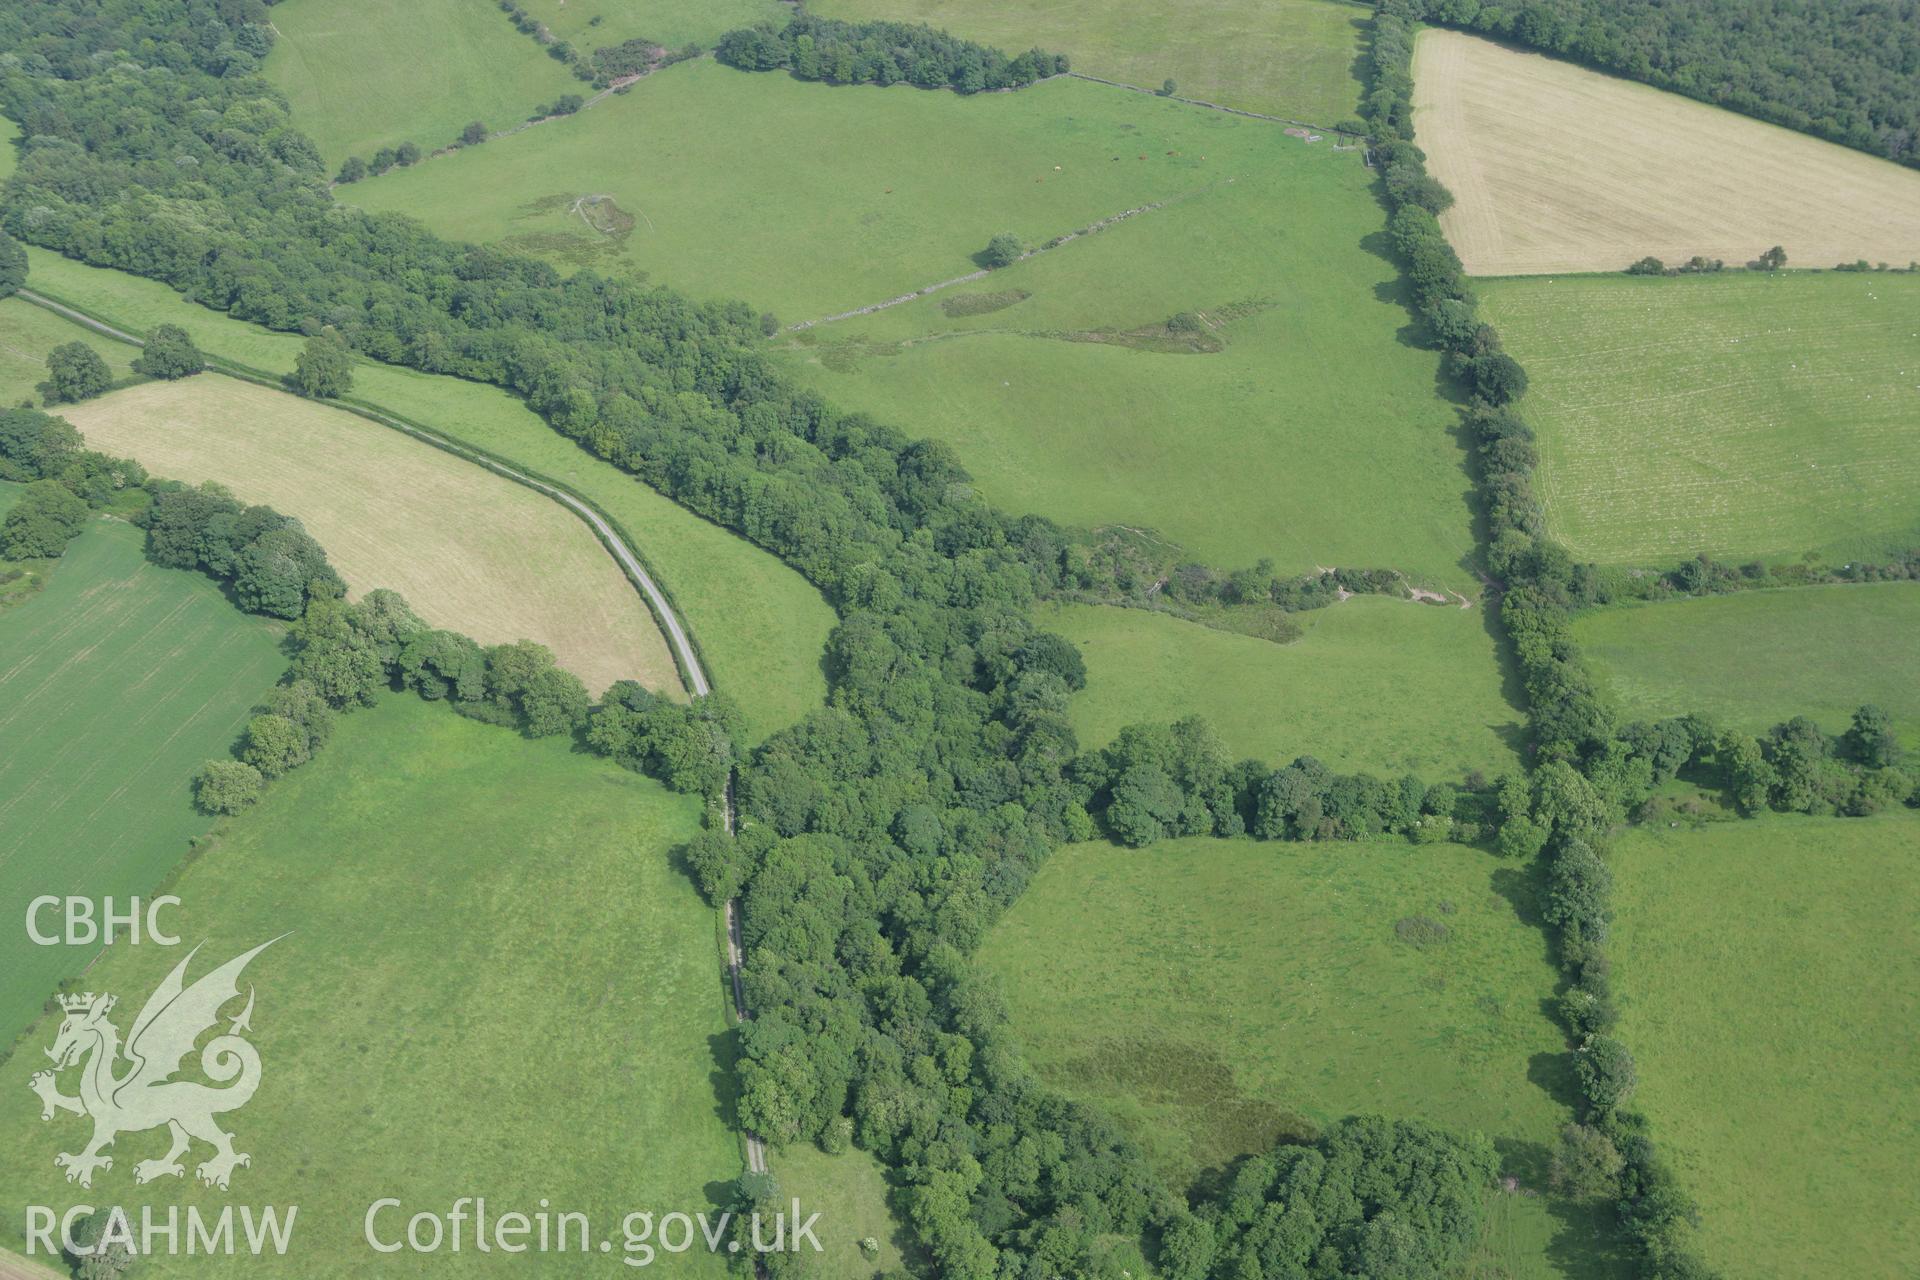 RCAHMW colour oblique photograph of Offa's Dyke, section from the footpath south of Pen-y-Bryn to Orseddwen. Taken by Toby Driver on 01/07/2008.